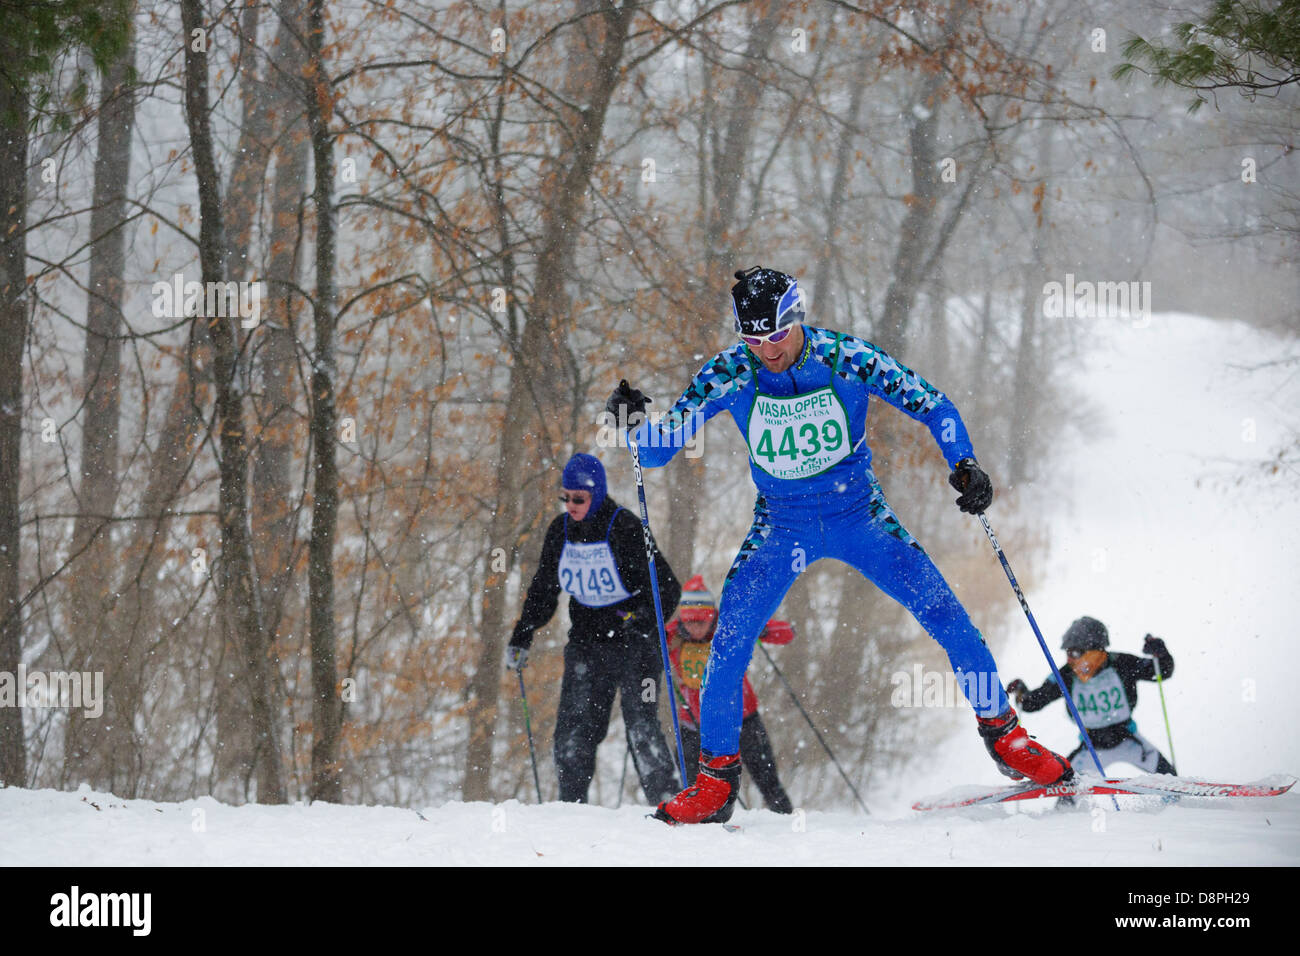 Cross country skiing competitors climb a hill during the Mora Vasaloppet. Stock Photo